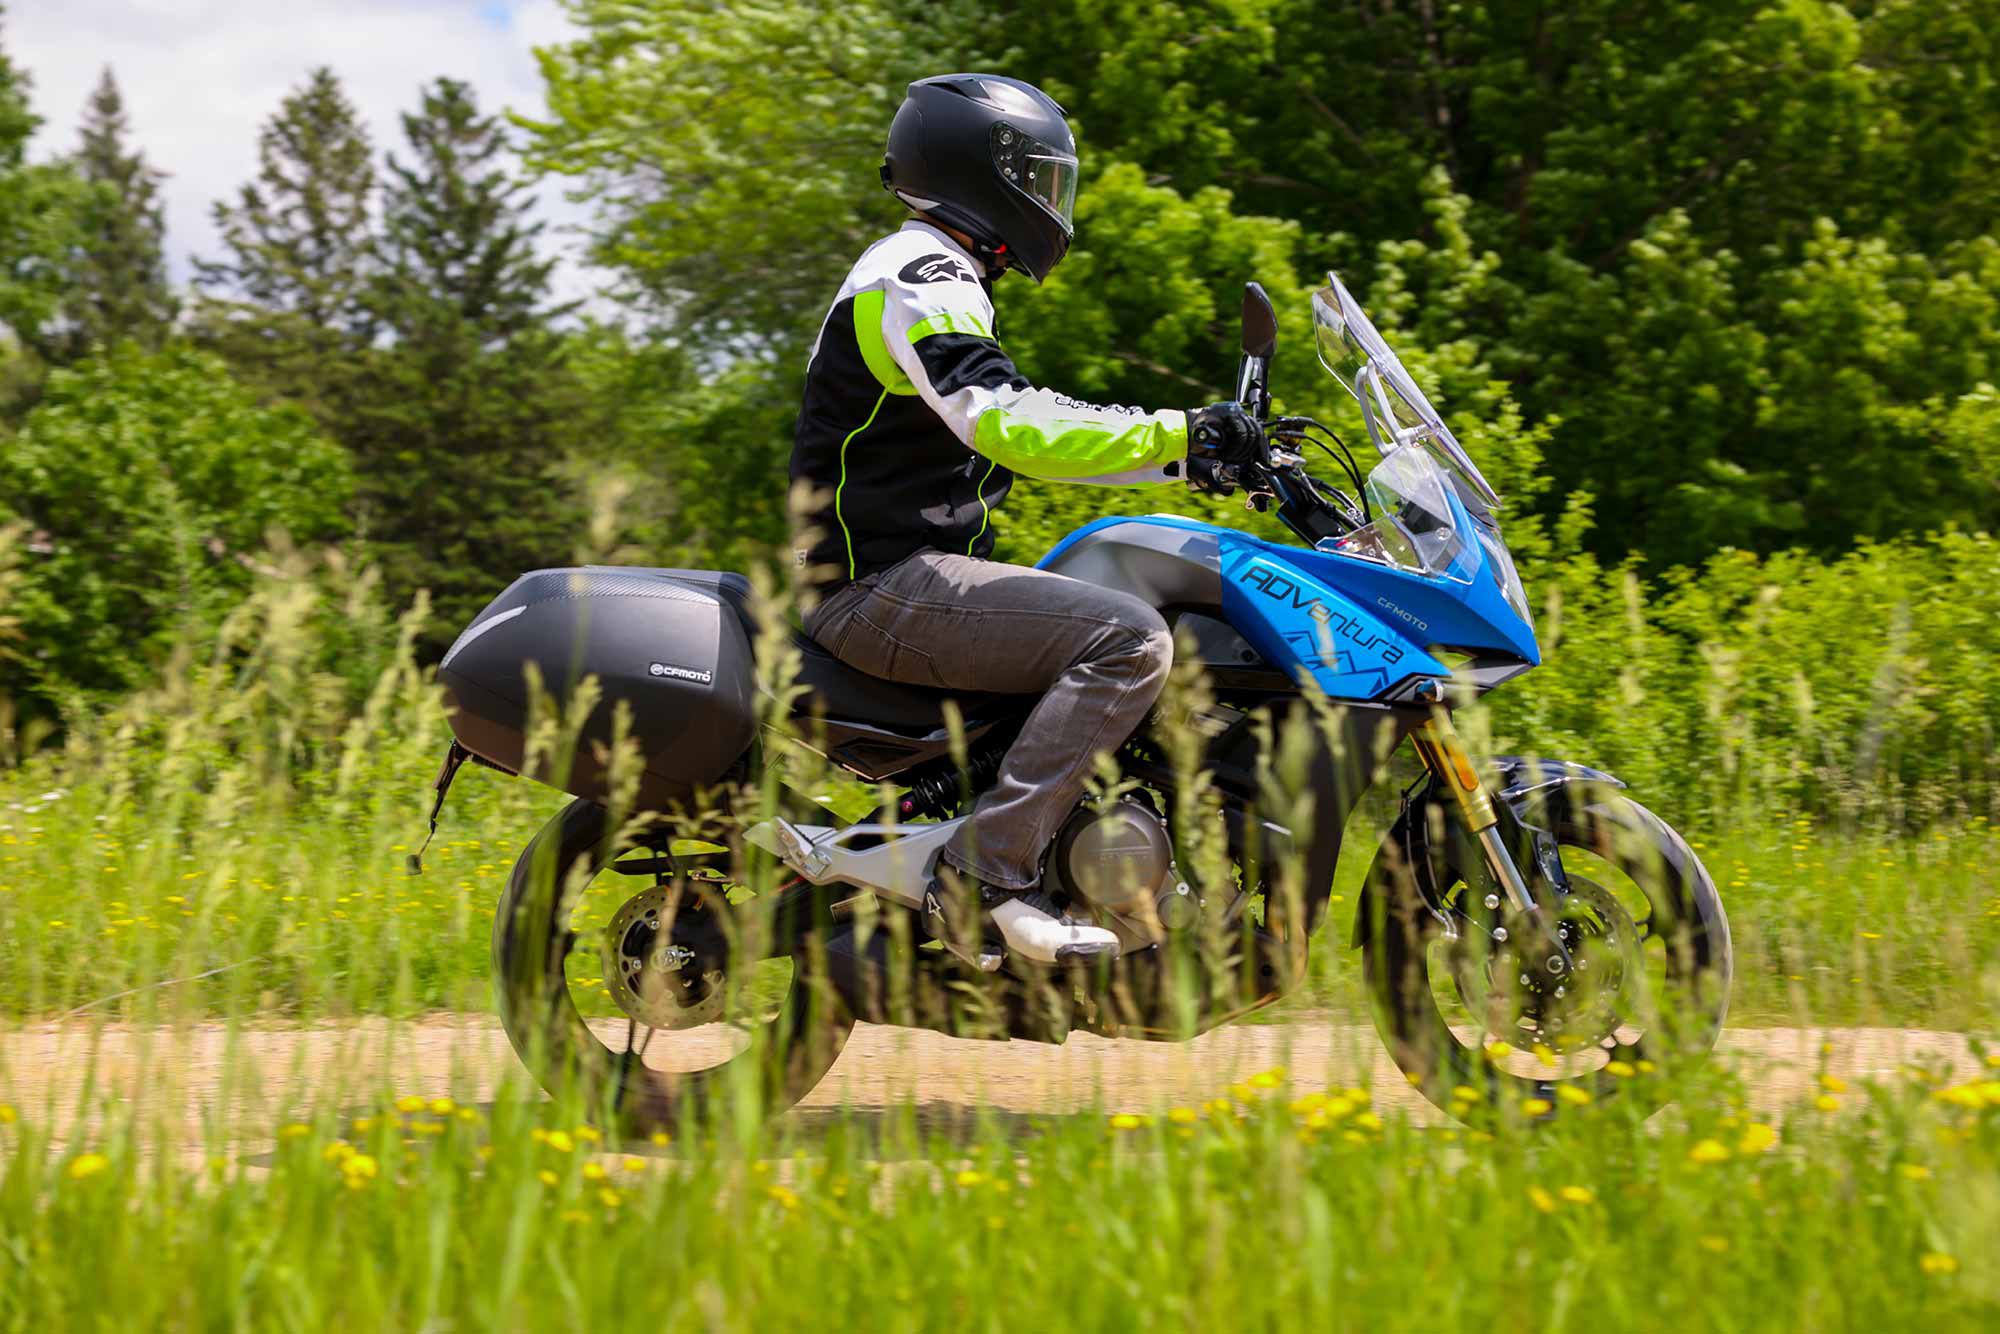 The 650 Adventura offers just enough ground clearance and suspension travel to explore off the beaten path.